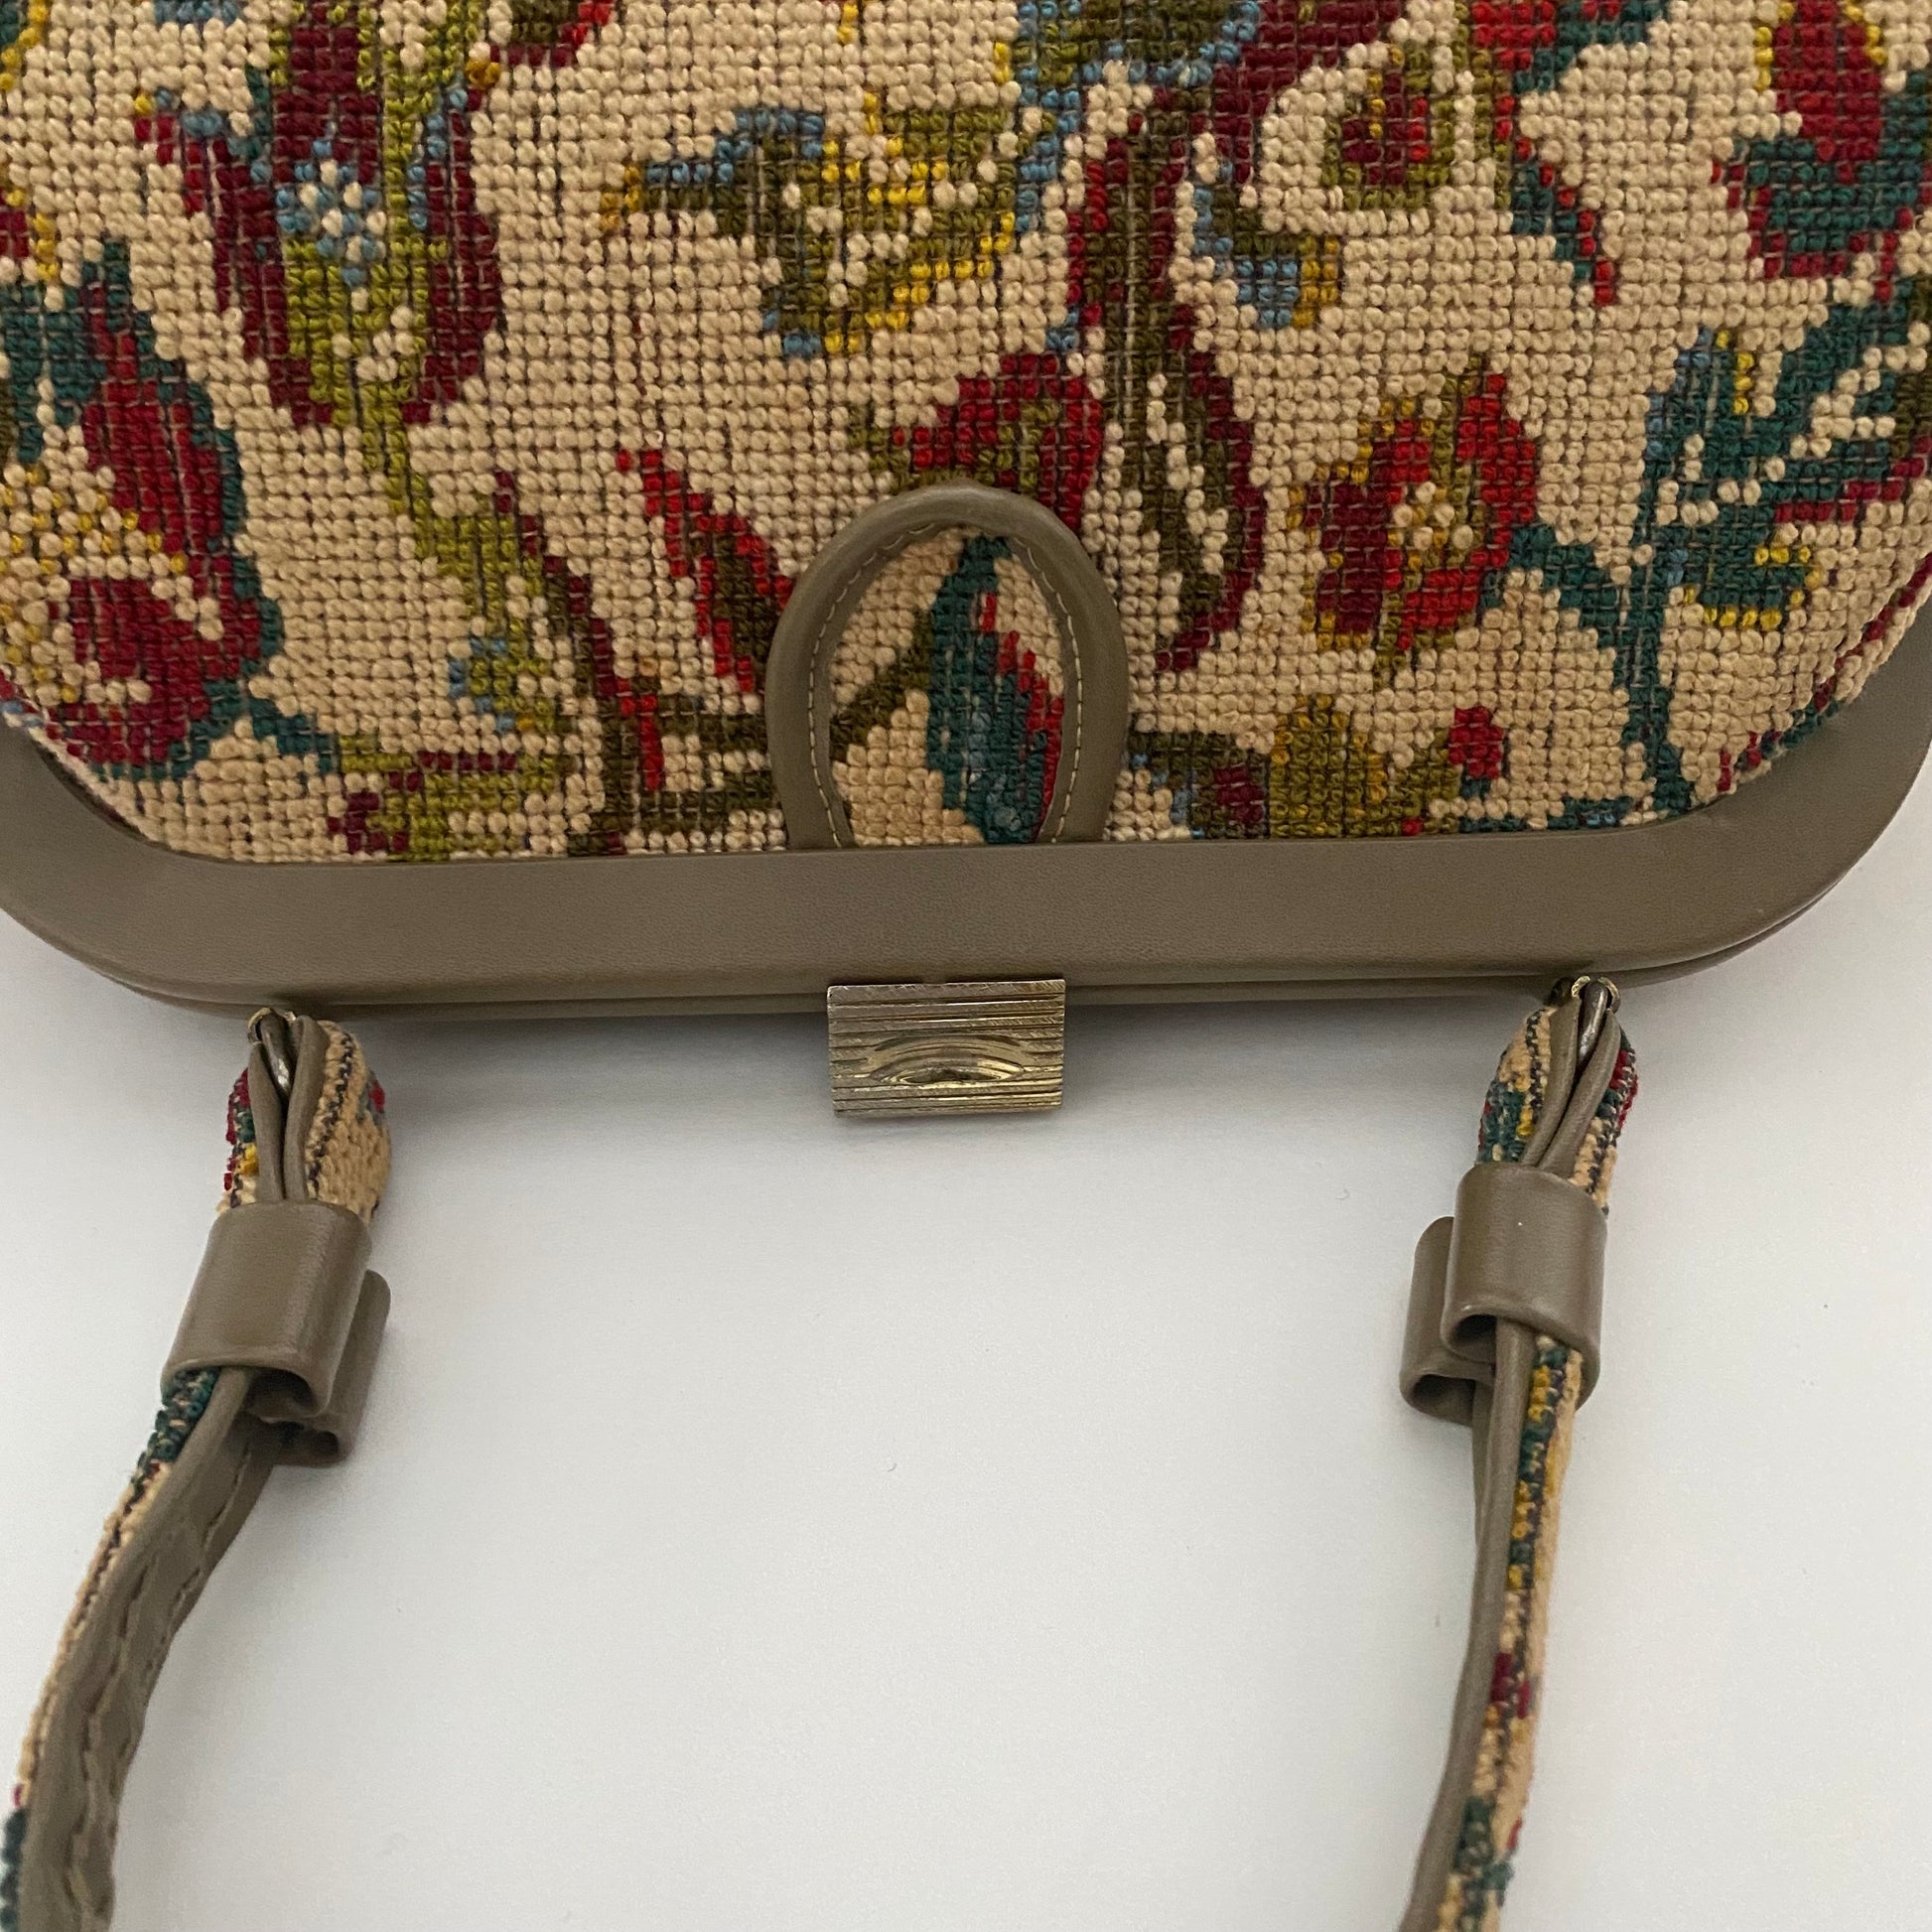 1950s/60s Needlepoint Floral Bag